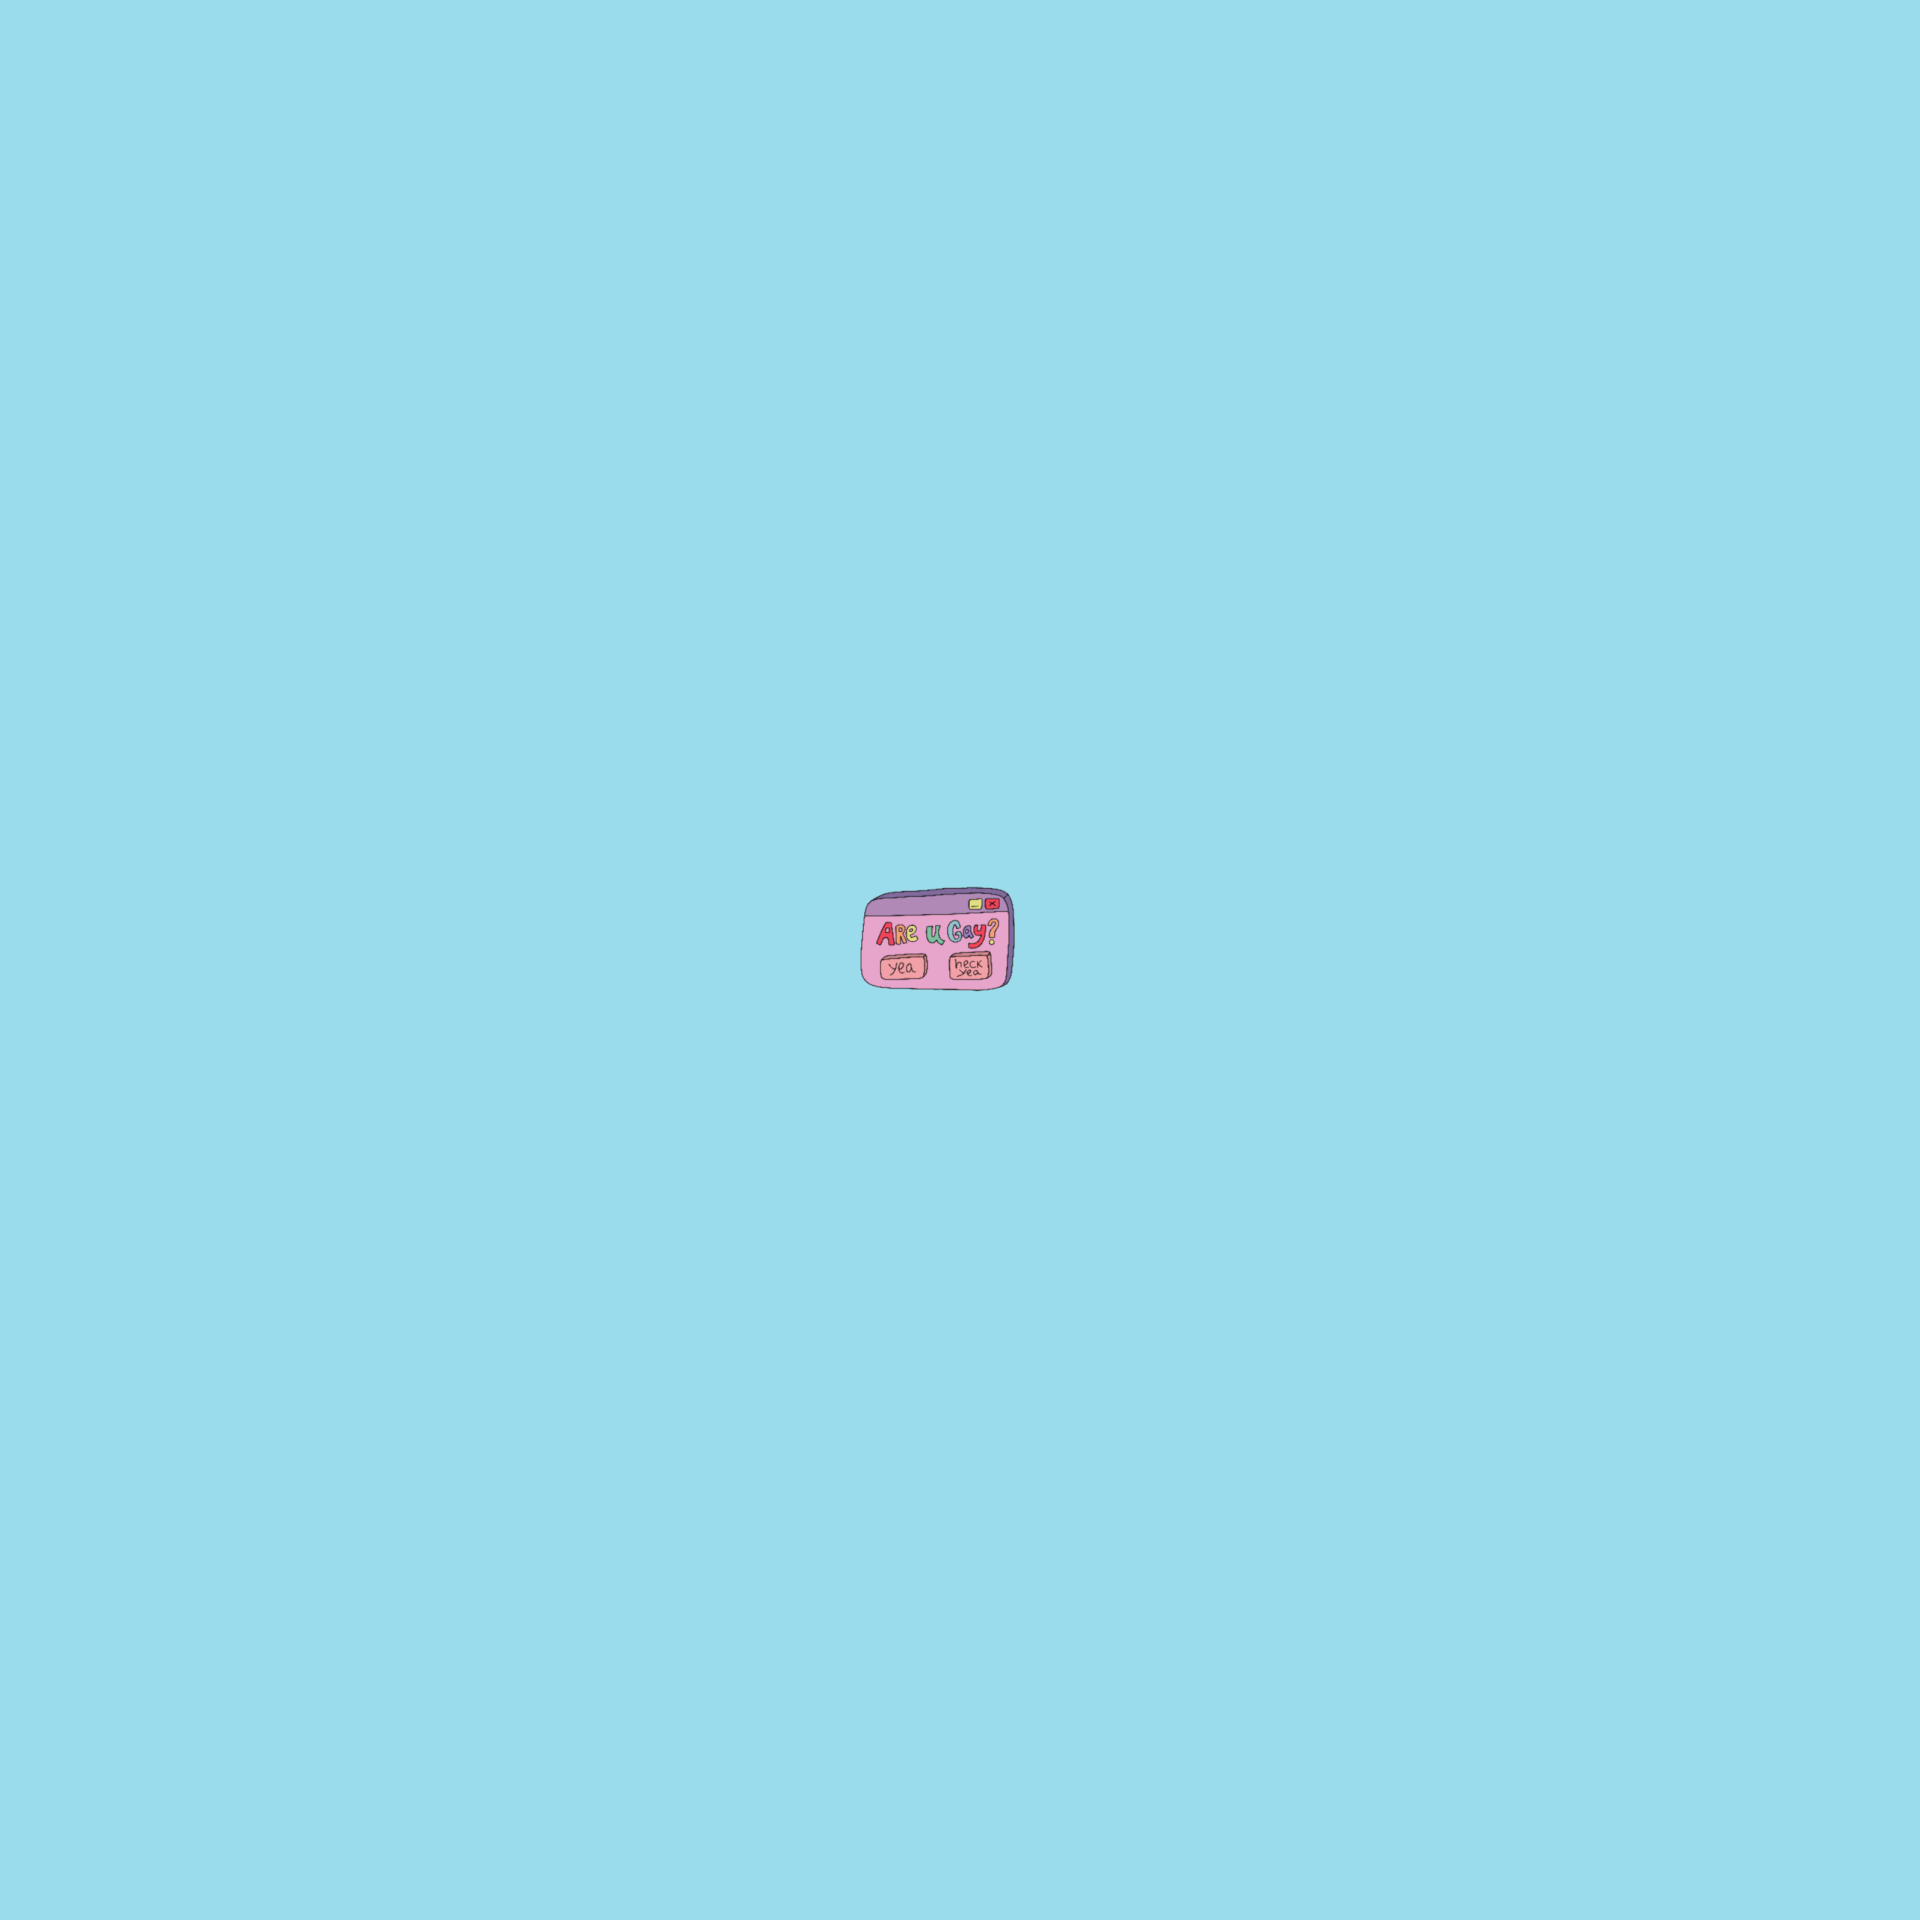 A small pink square on a light blue background - Gay